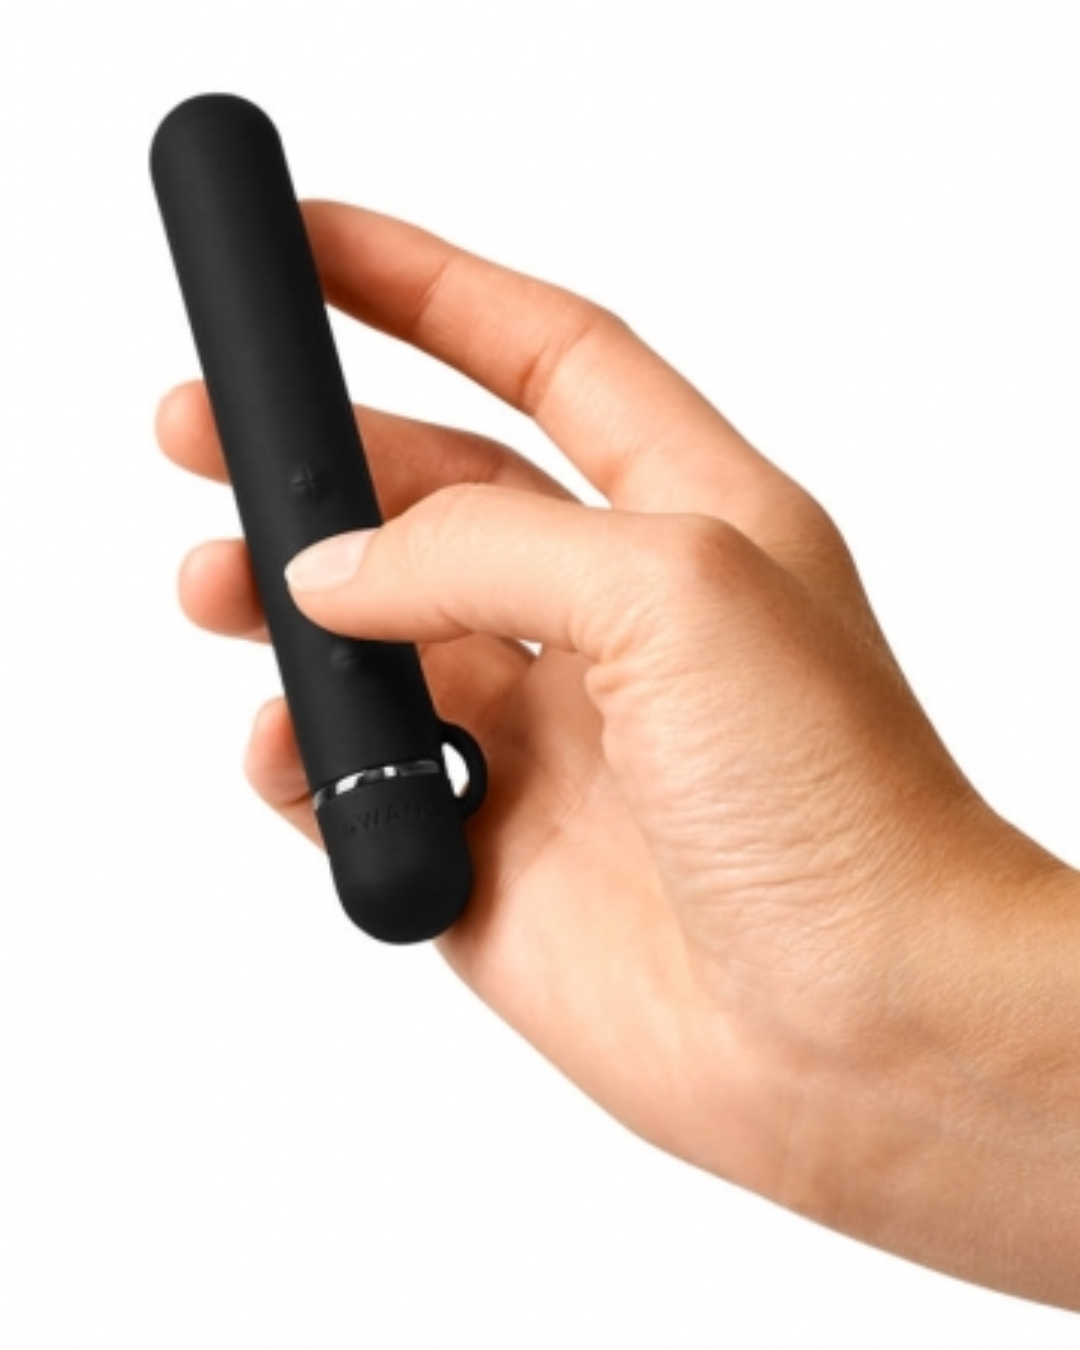 Le Wand Baton Slim Rechargeable Waterproof Vibrator - Black held in a hand